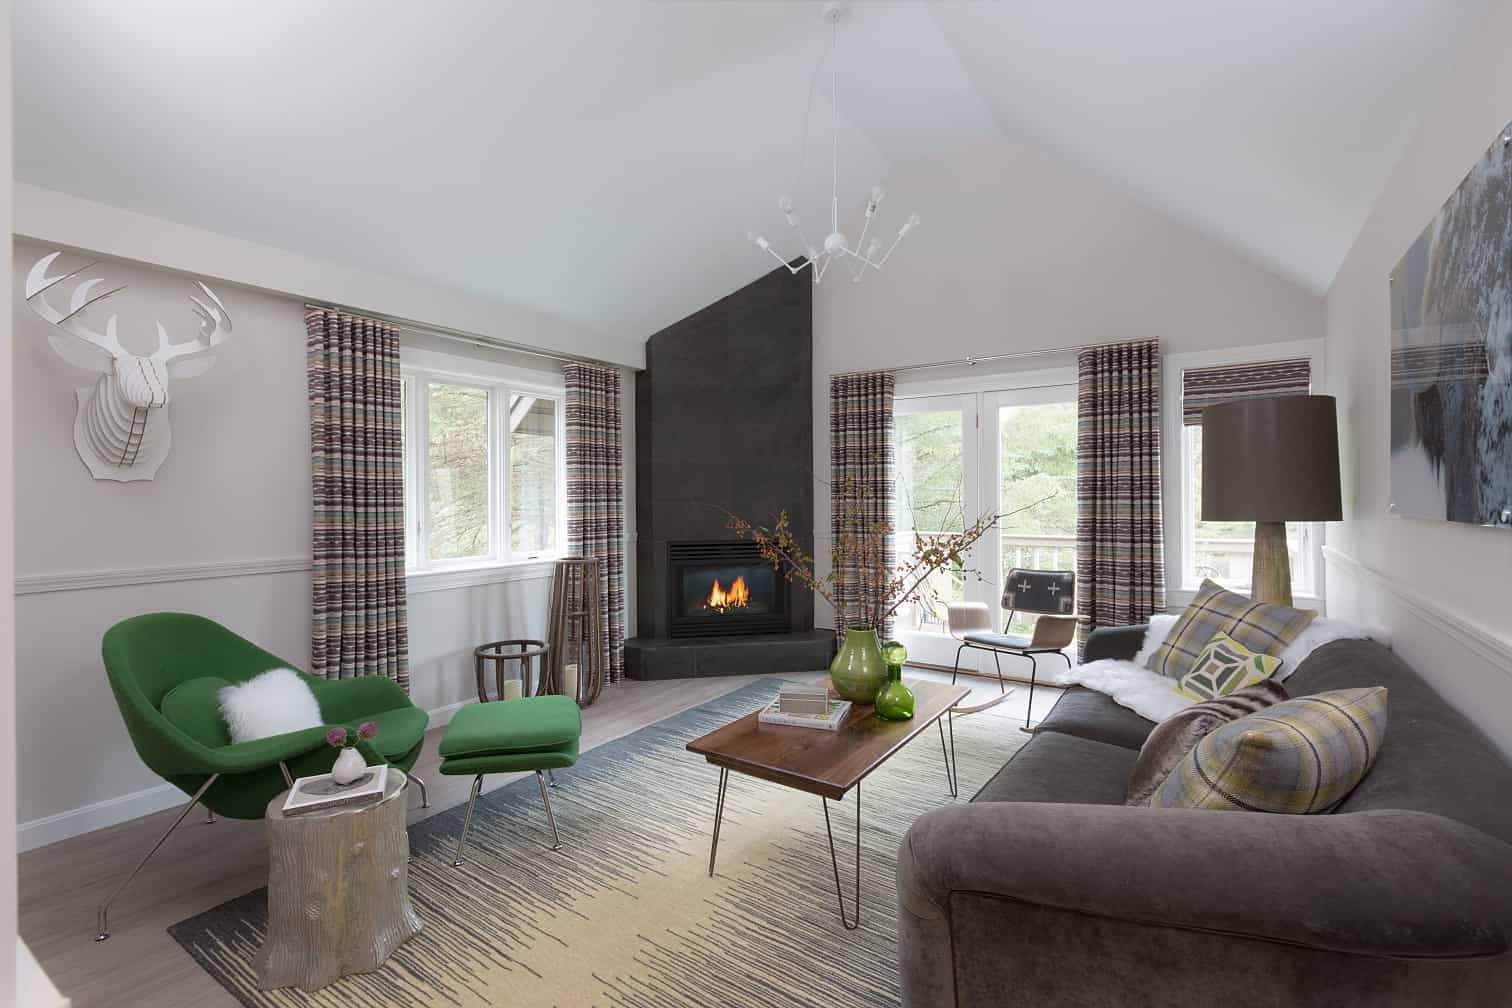 Field Guide Lodge Stowe - Living Room with Fireplace and Green Chair